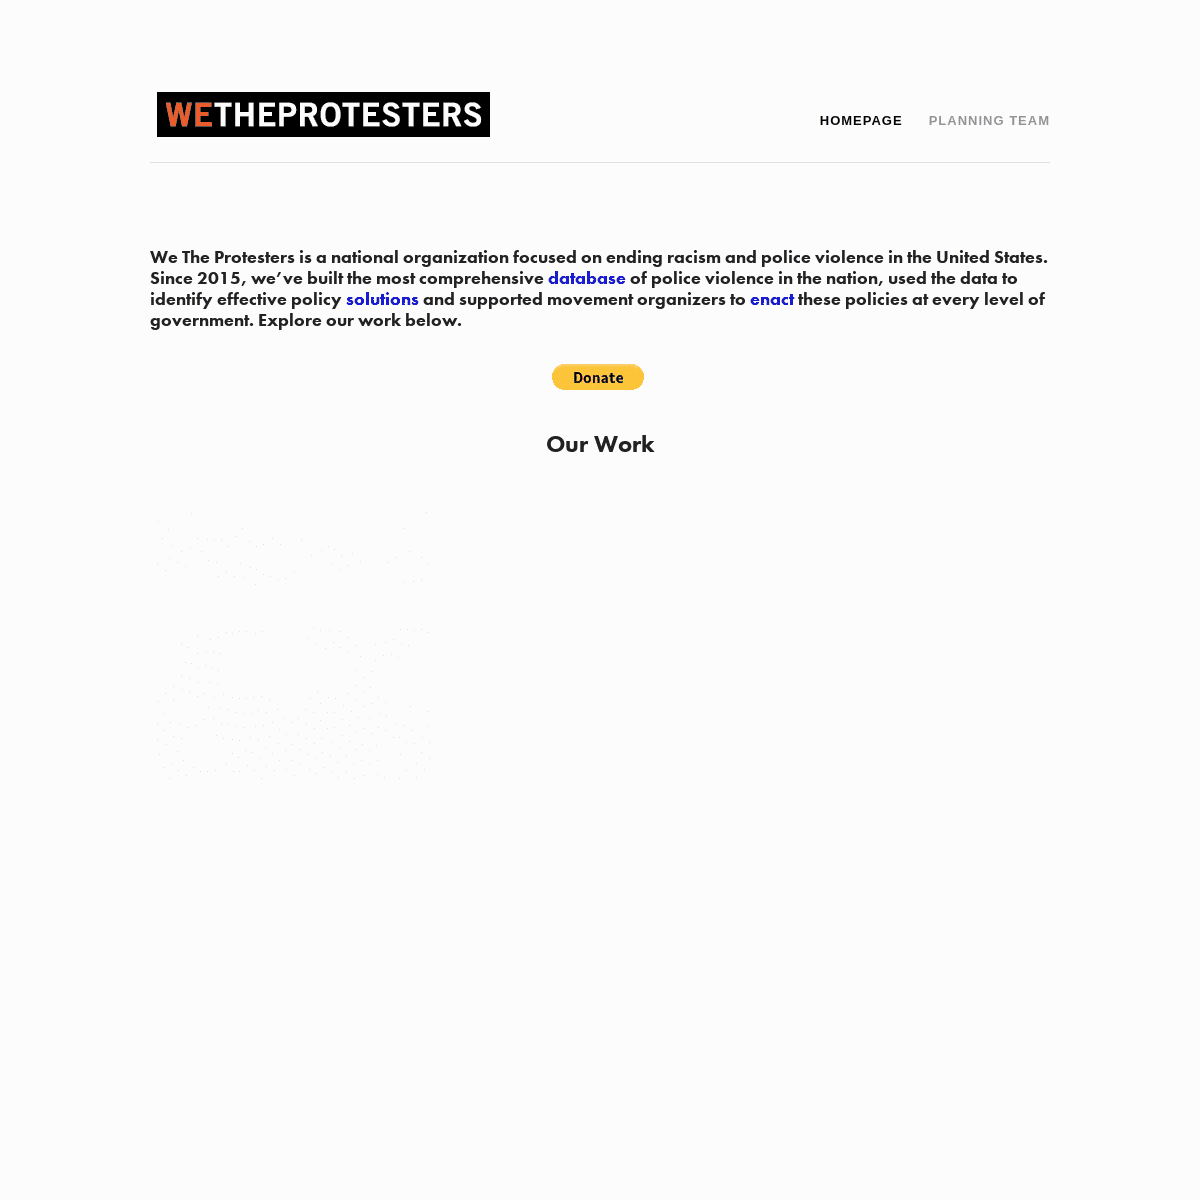 A complete backup of https://wetheprotesters.org